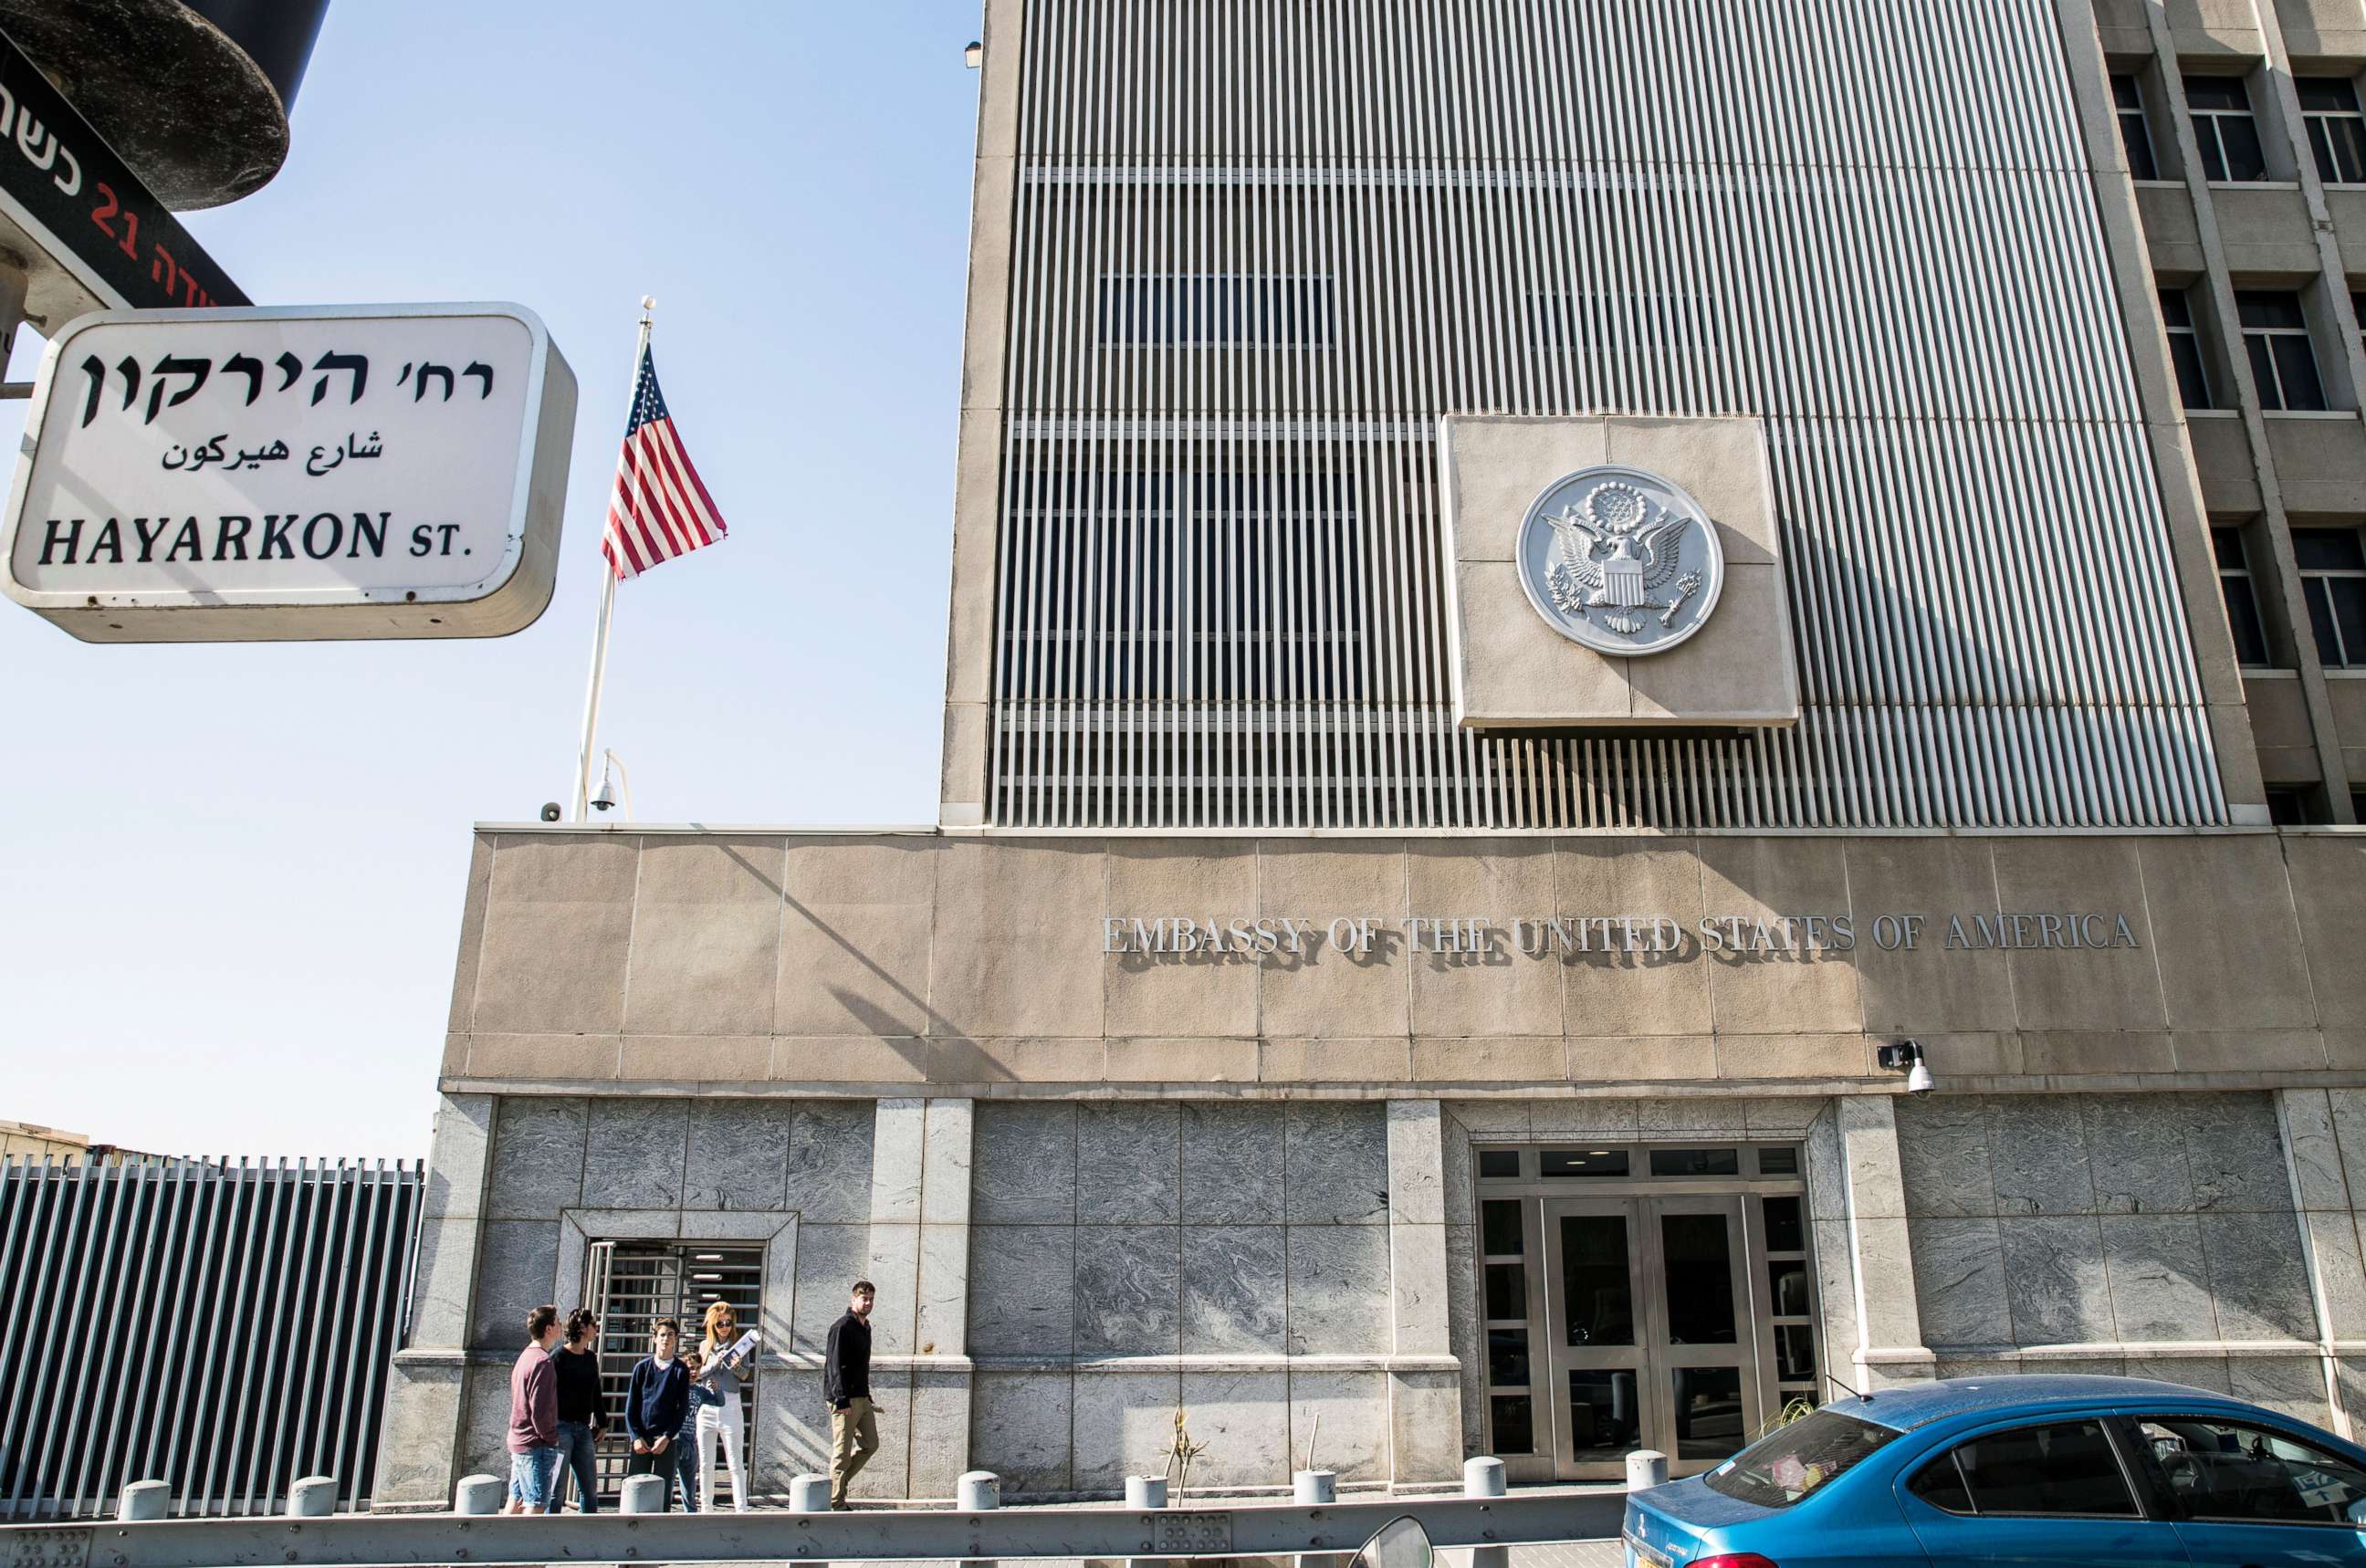 PHOTO: A picture taken on Jan. 20, 2017 shows the exterior of the U.S. Embassy building in the Israeli coastal city of Tel Aviv.